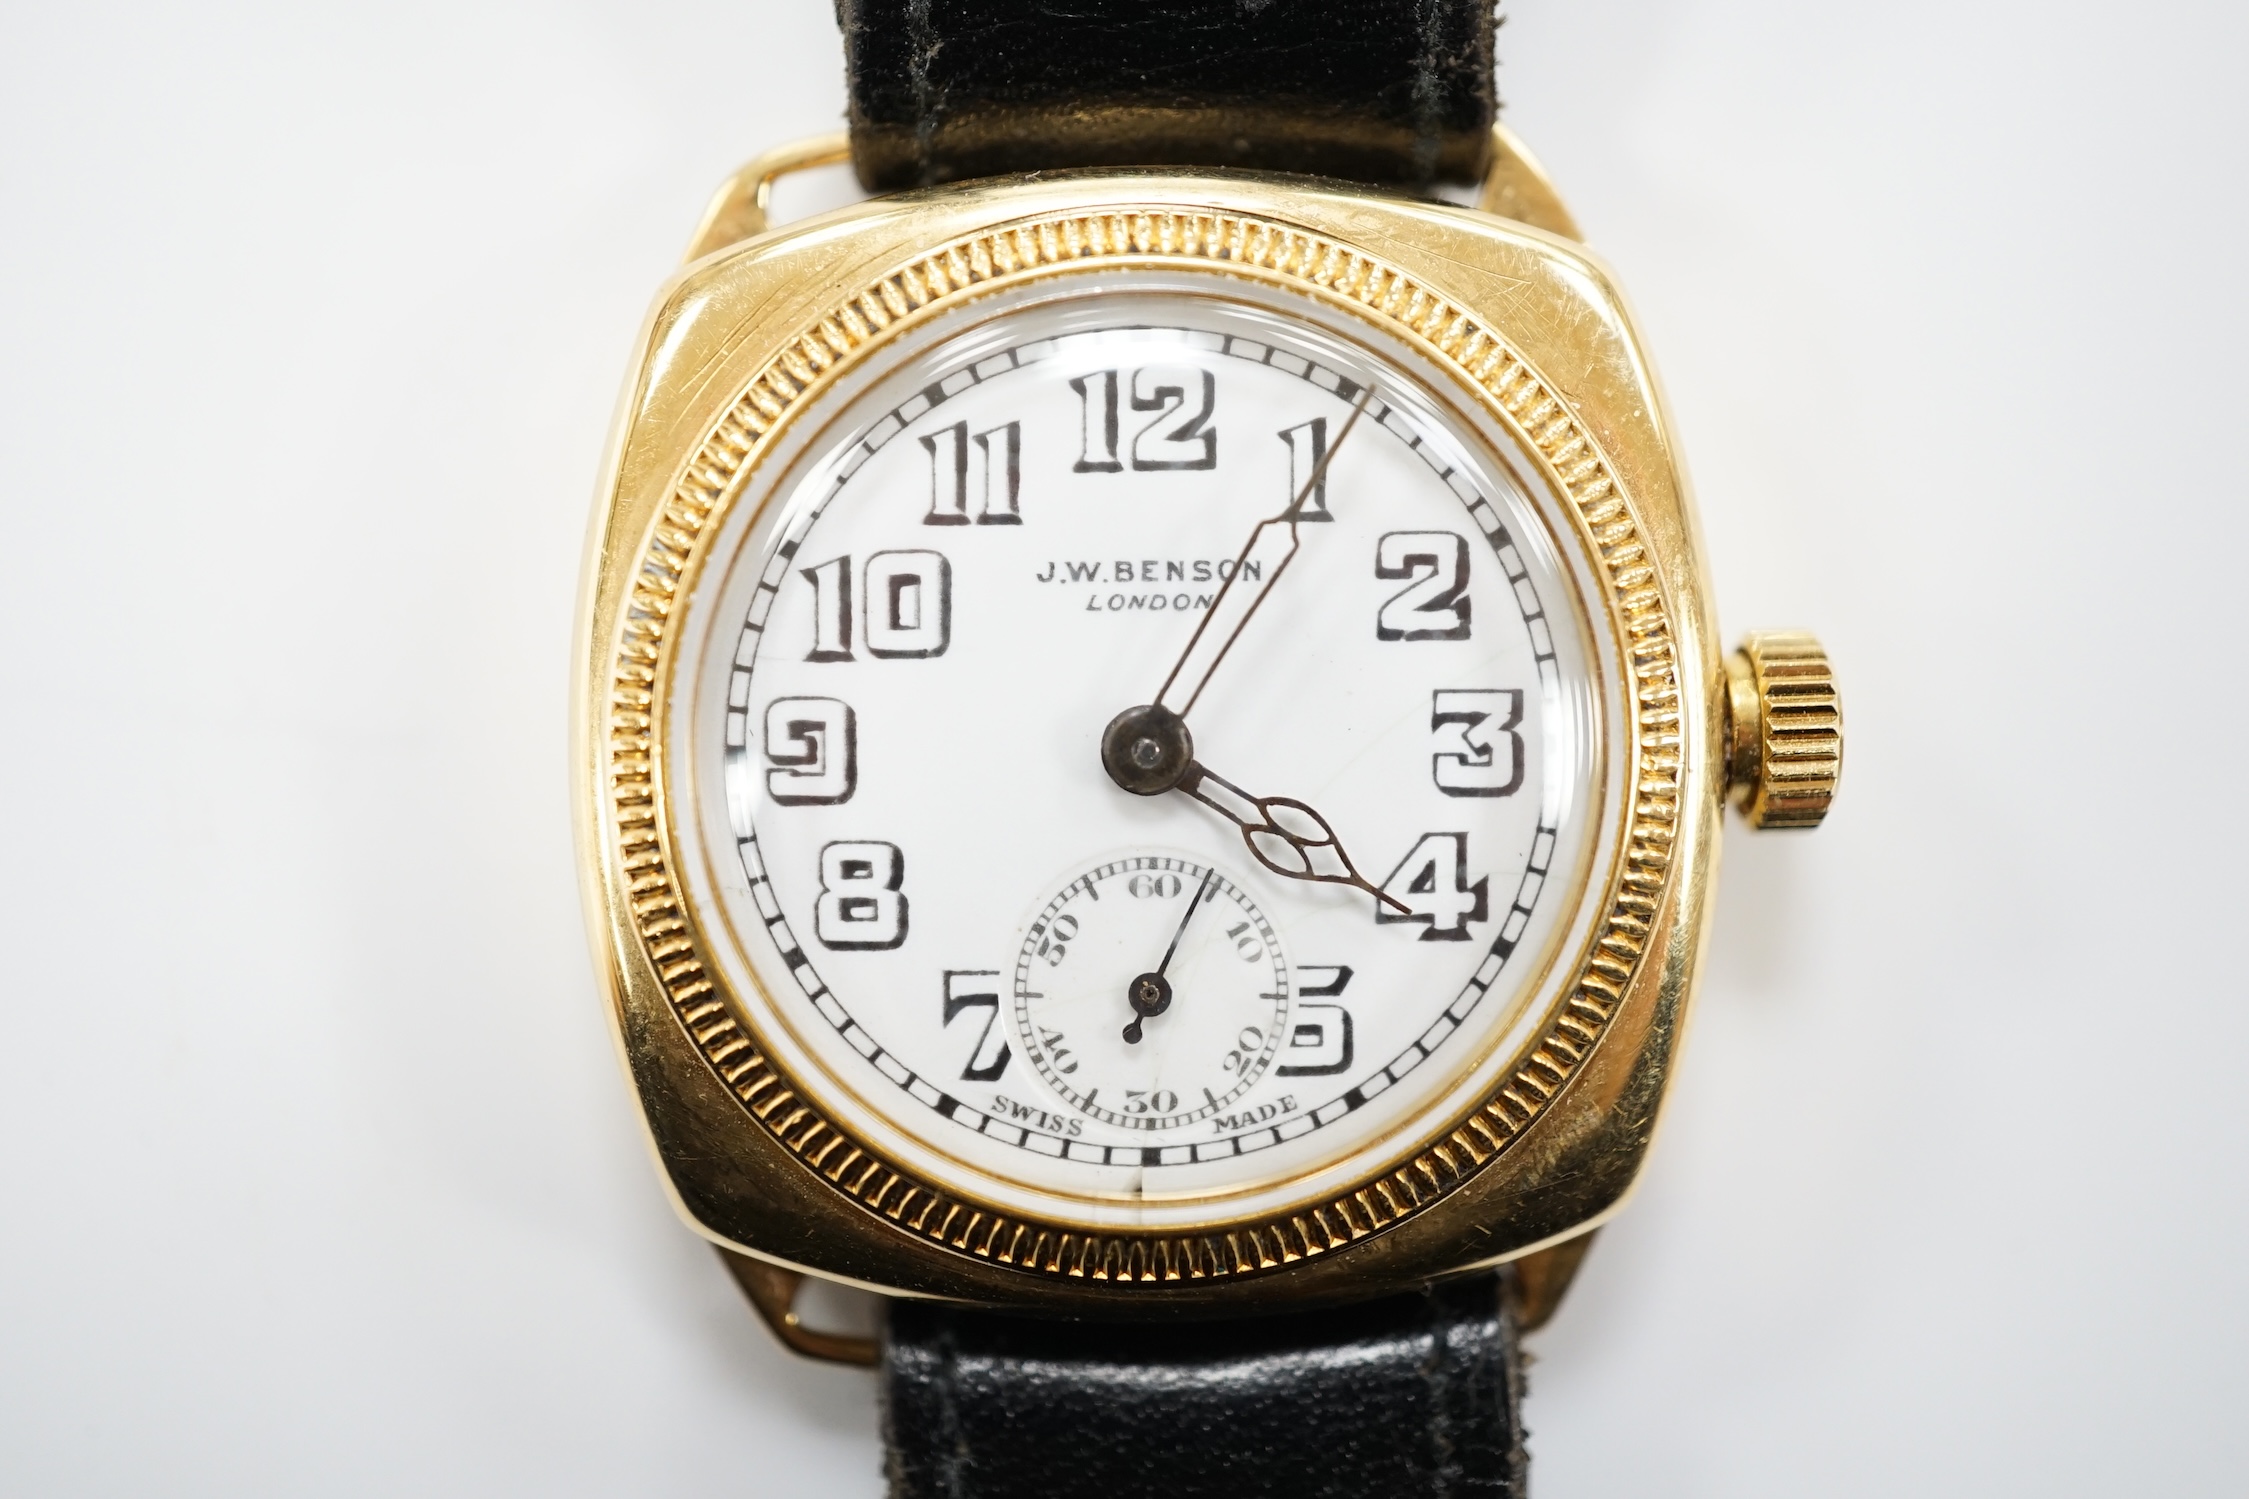 A gentleman's yellow metal J.W. Benson manual wrist watch, with Arabic dial and subsidiary seconds, on a black leather strap.